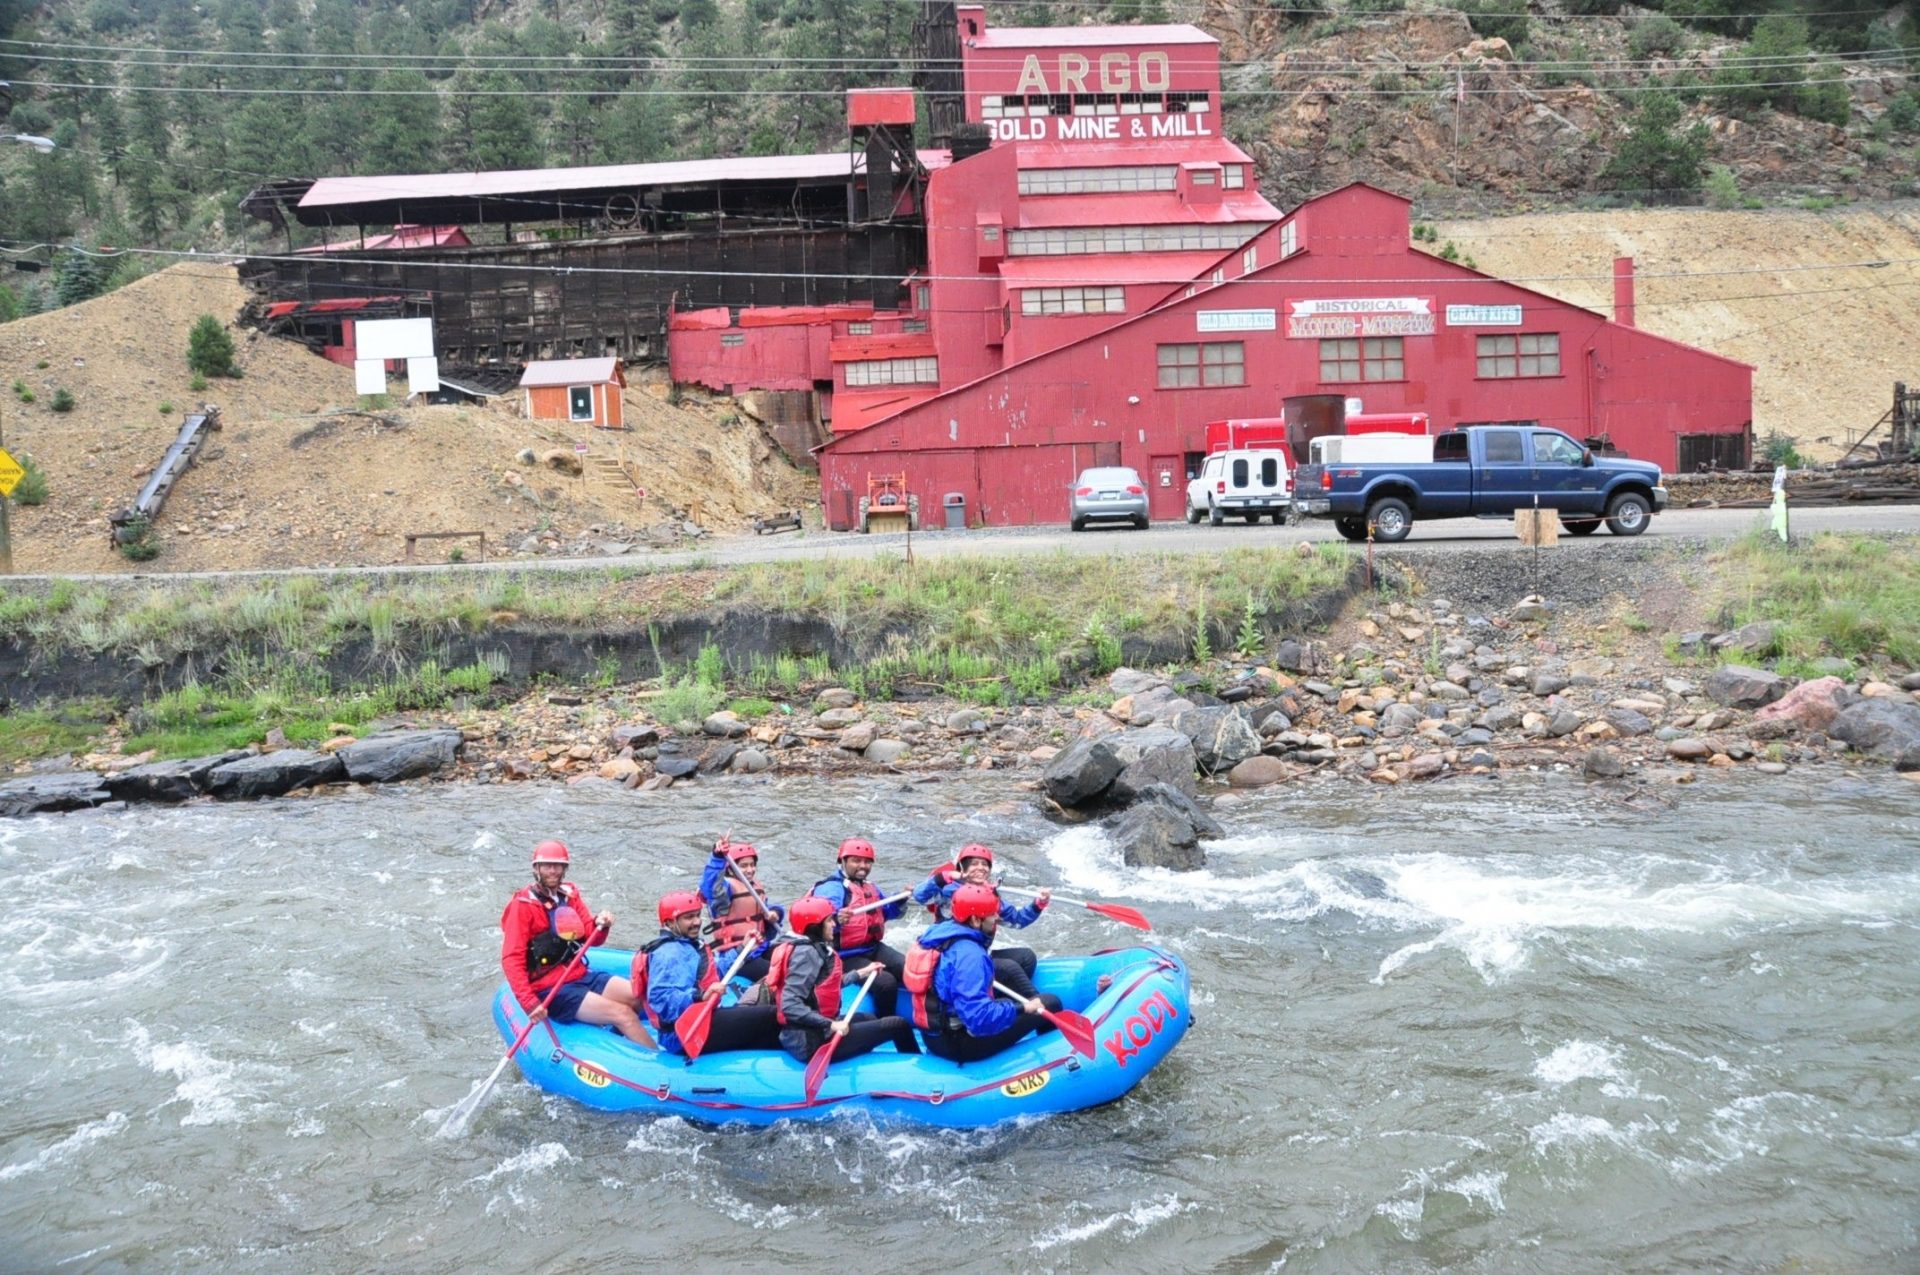 Clear Creek whitewater rafting offers great adventure and excitement for experienced visitors